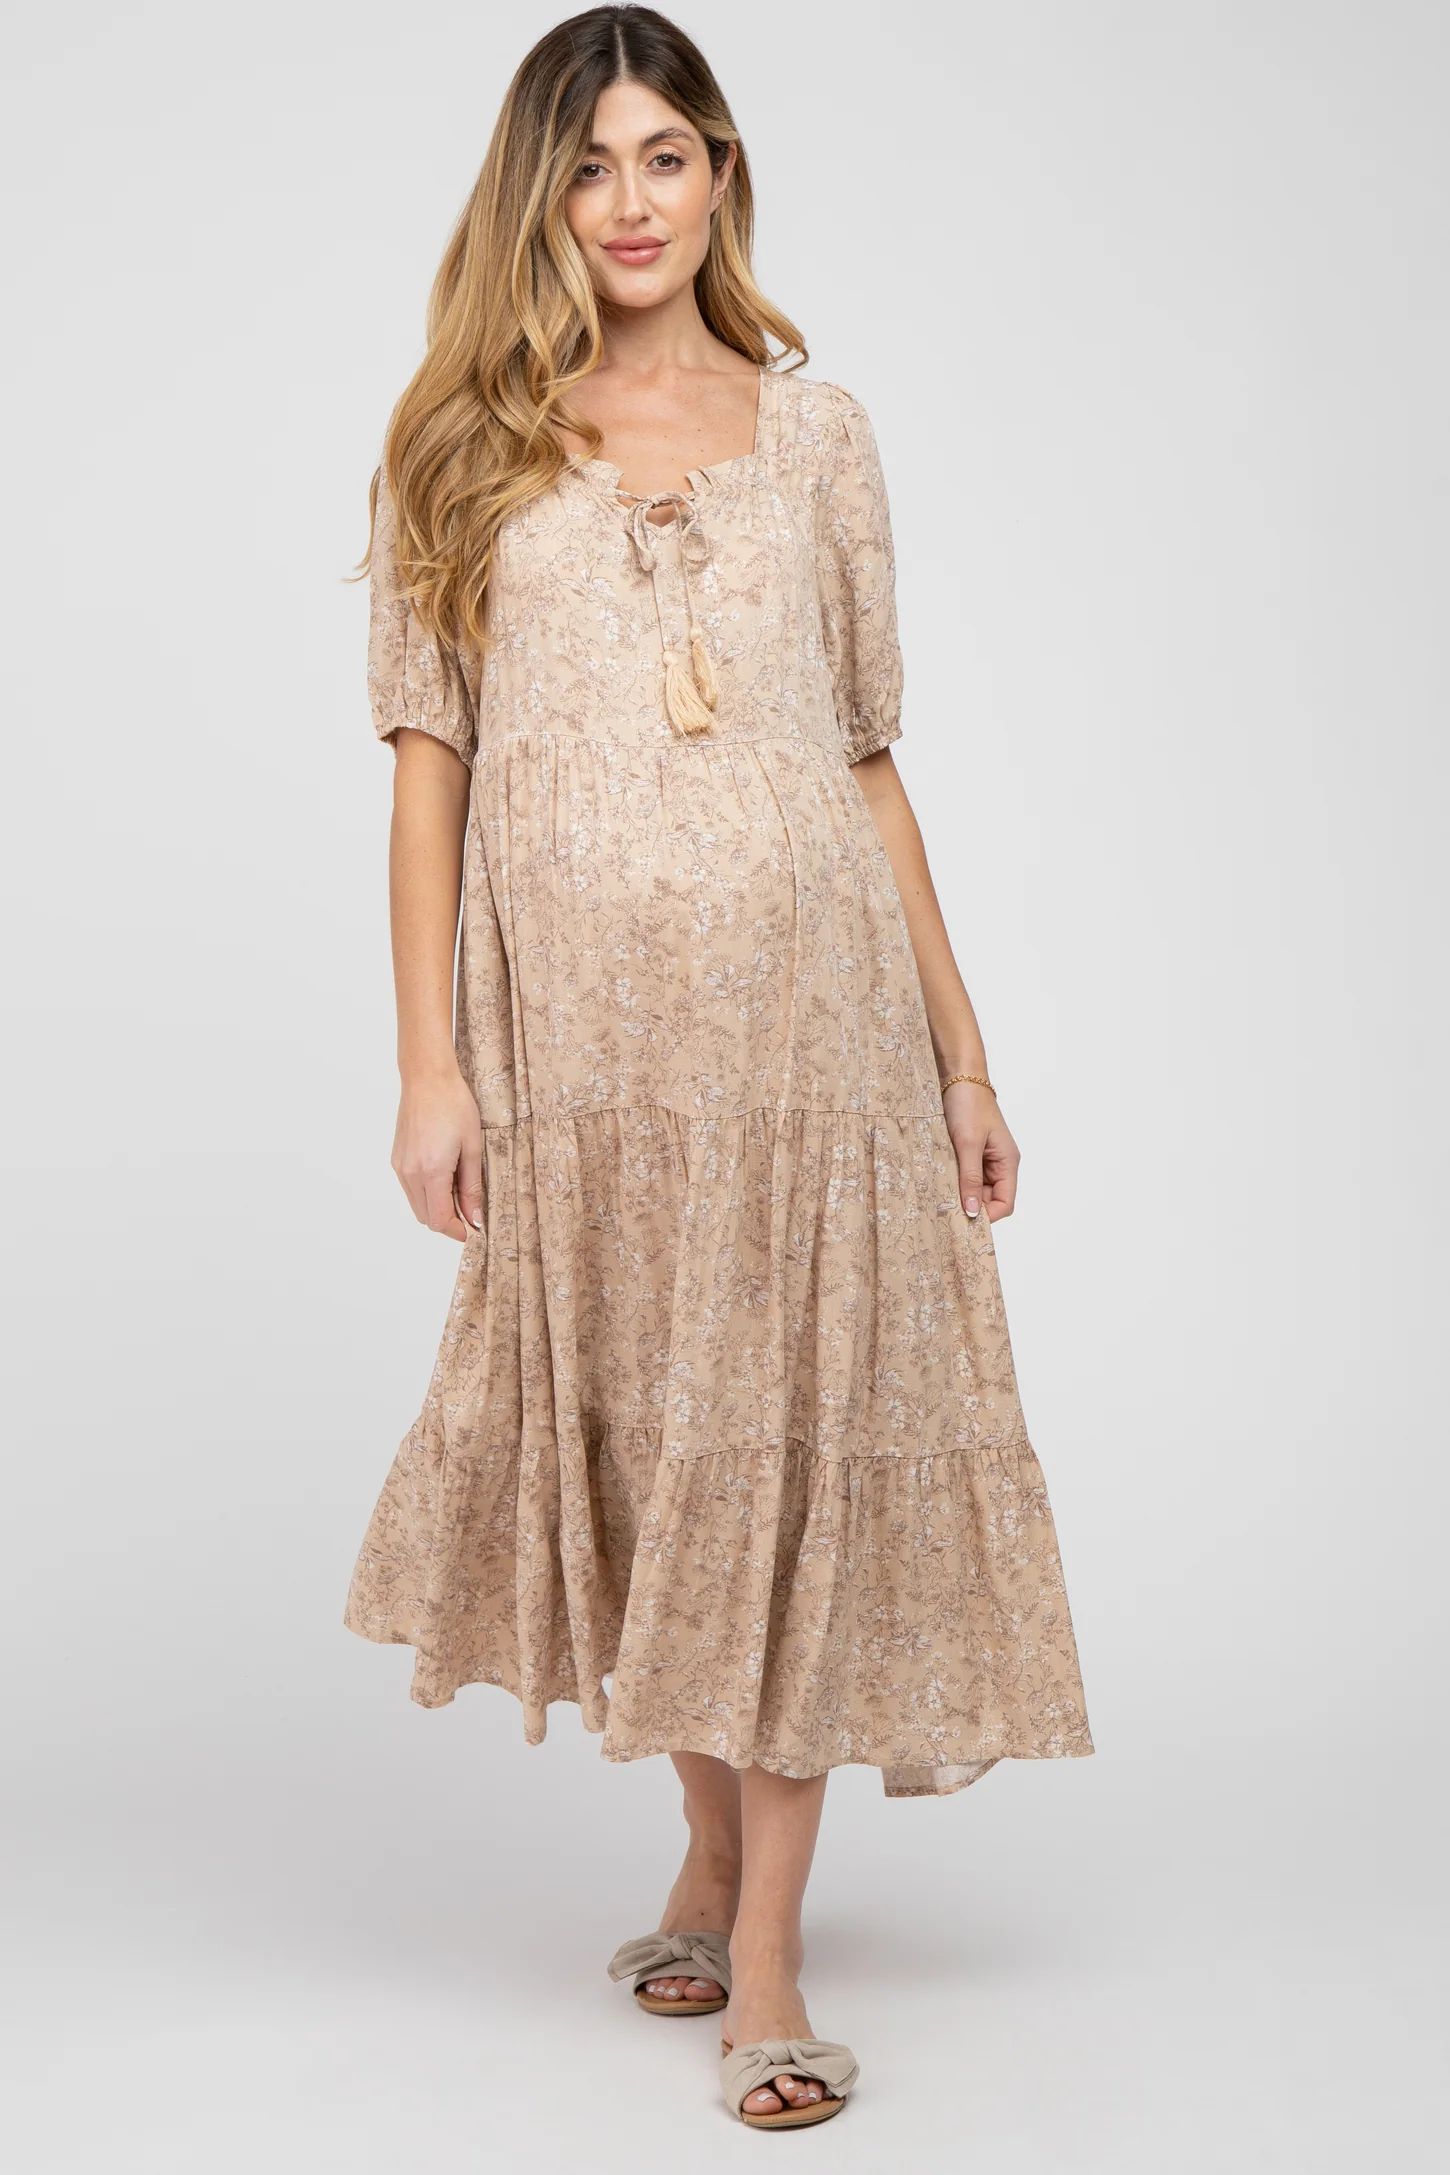 Taupe Floral Square Neck Front Tie Tiered Maternity Mid Dress | PinkBlush Maternity